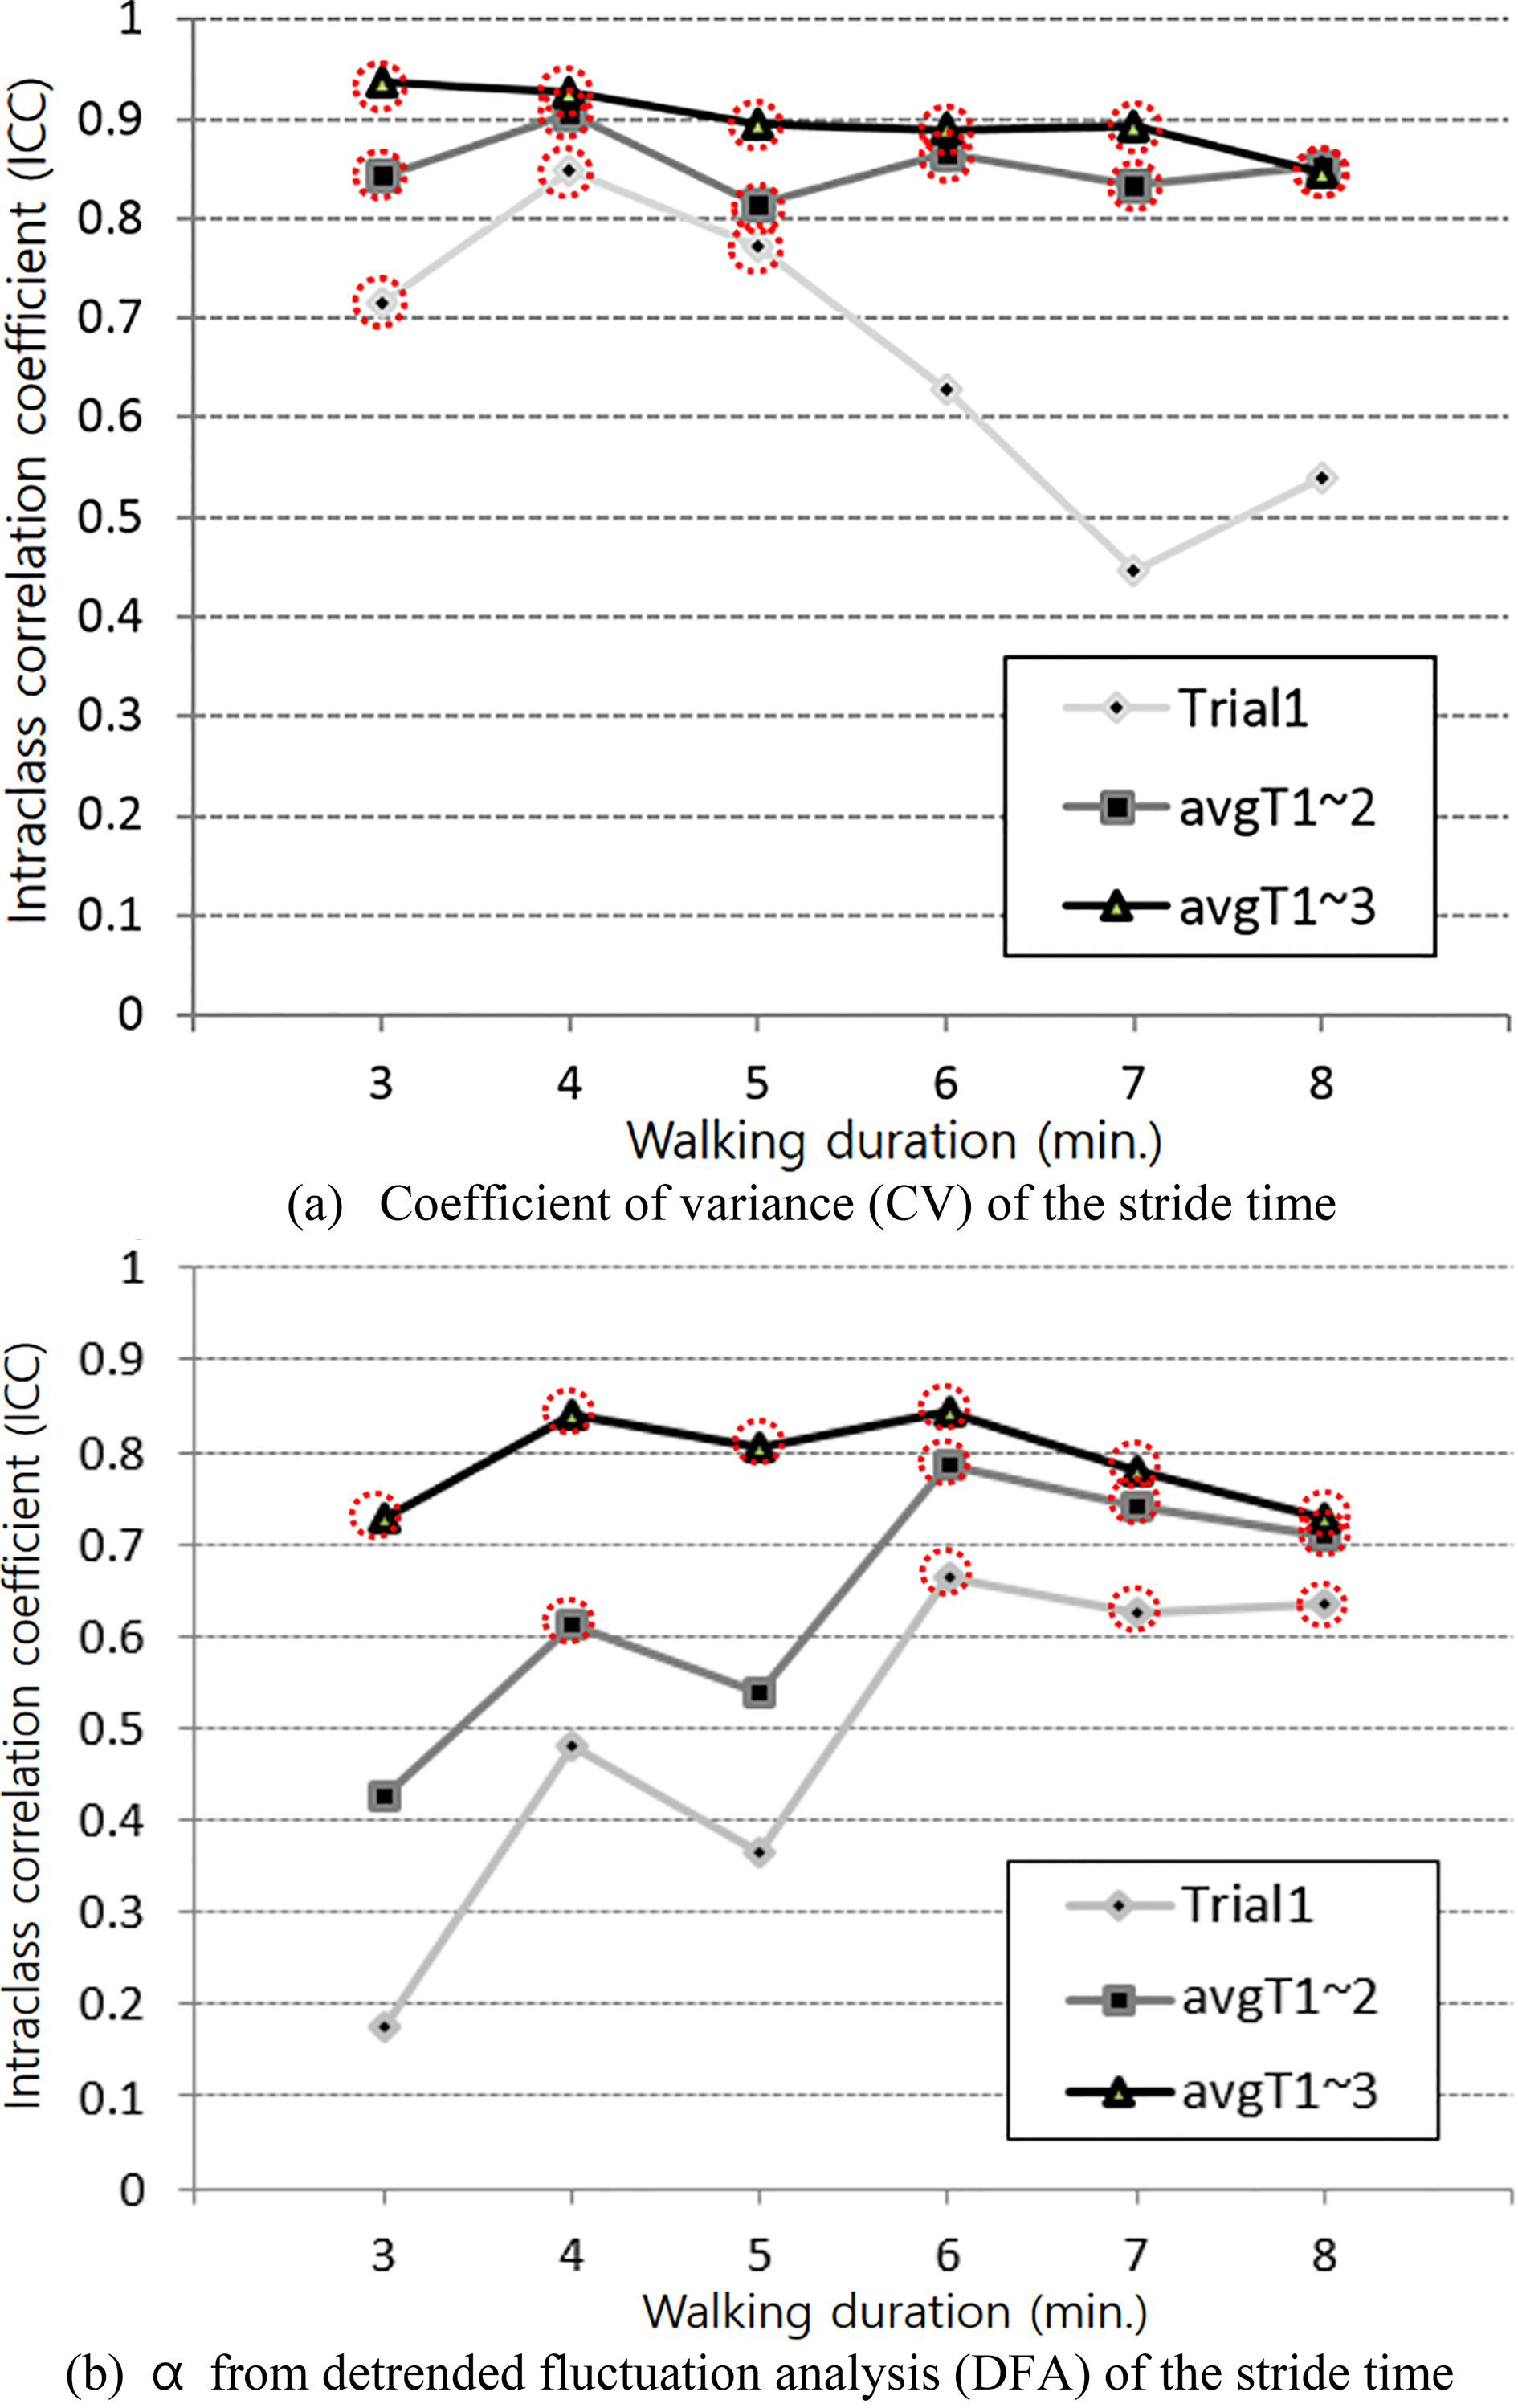 Day-to-day reproducibility of (a) the variability (CV) and (b) fractal dynamics (DFA) of the stride time by walking duration. (avgT1 ∼ 2: the average of trial 1 and trial 2, avgT1 ∼ 3: the average of trial 1, trial 2 and trial 3; Red dotted circle indicates that it is reproducible).